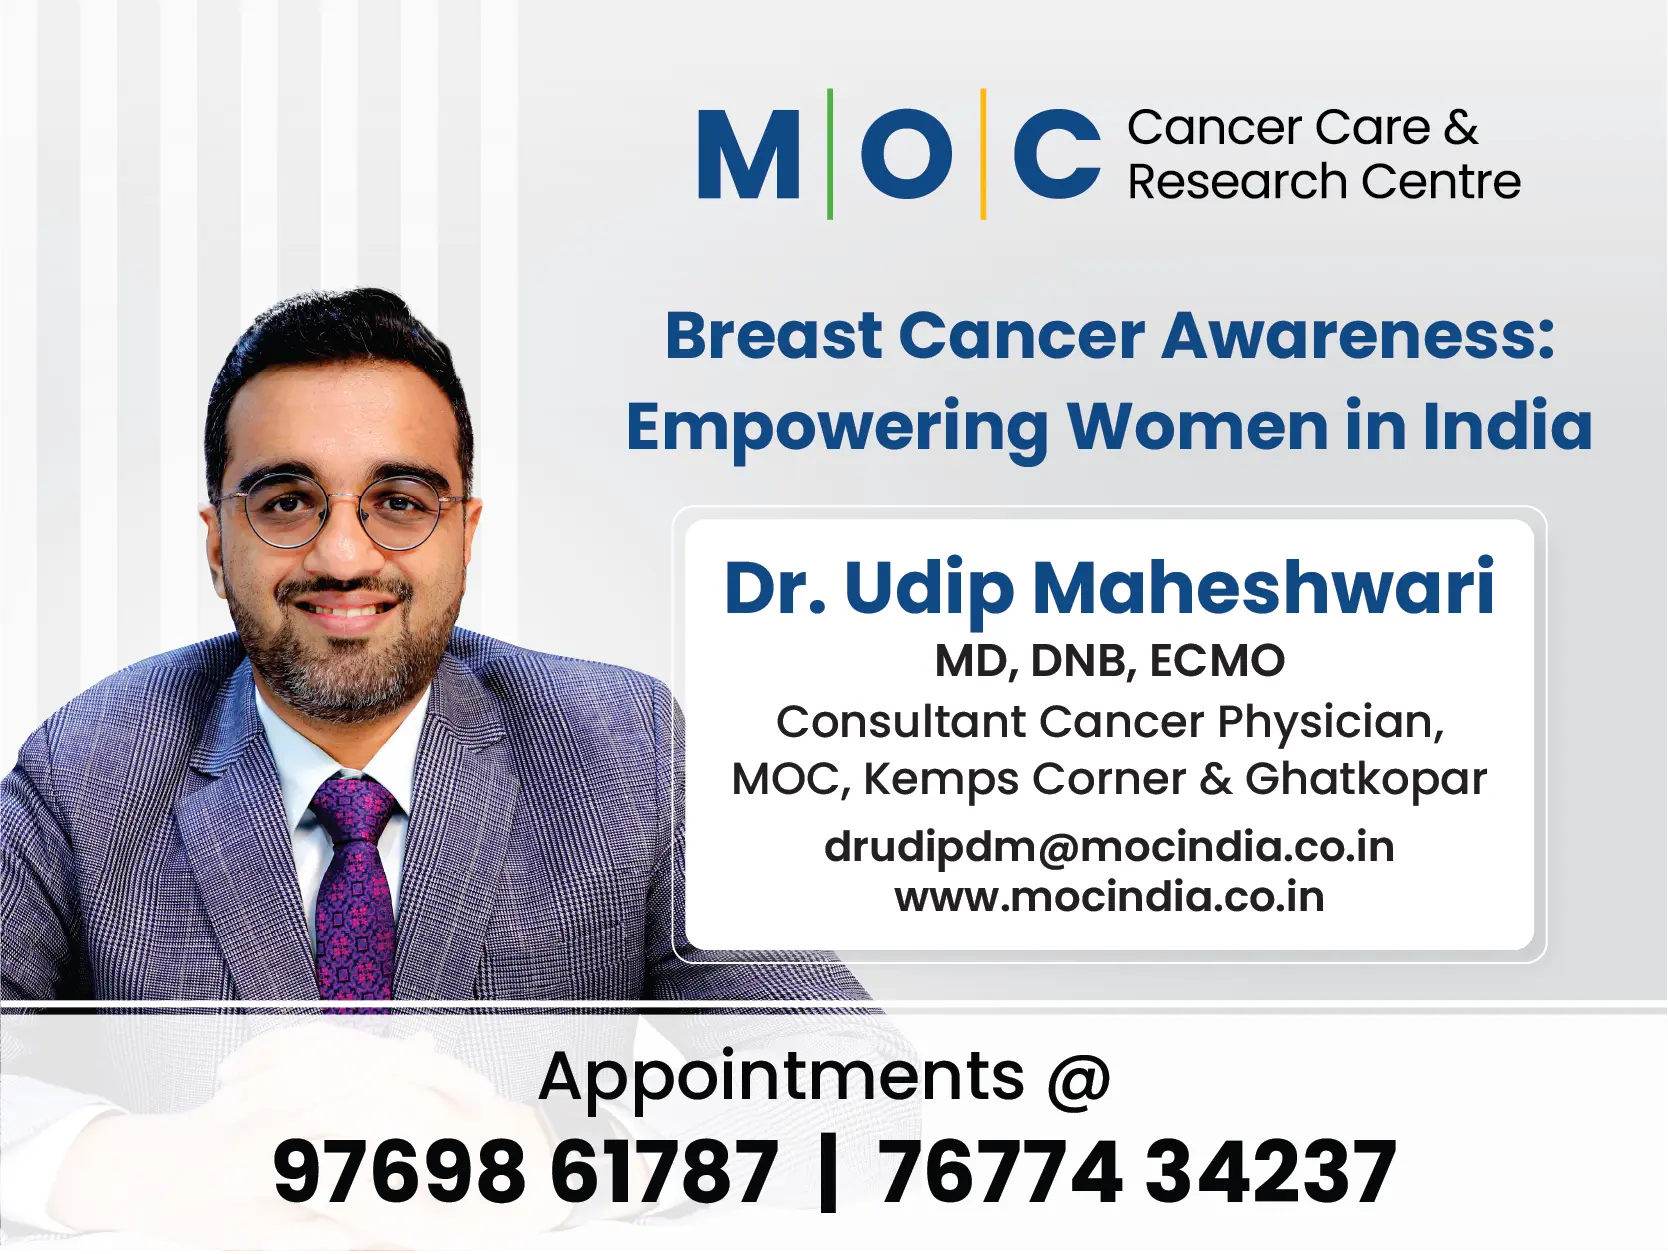 Breast Cancer Awareness - Empowering Women in India 